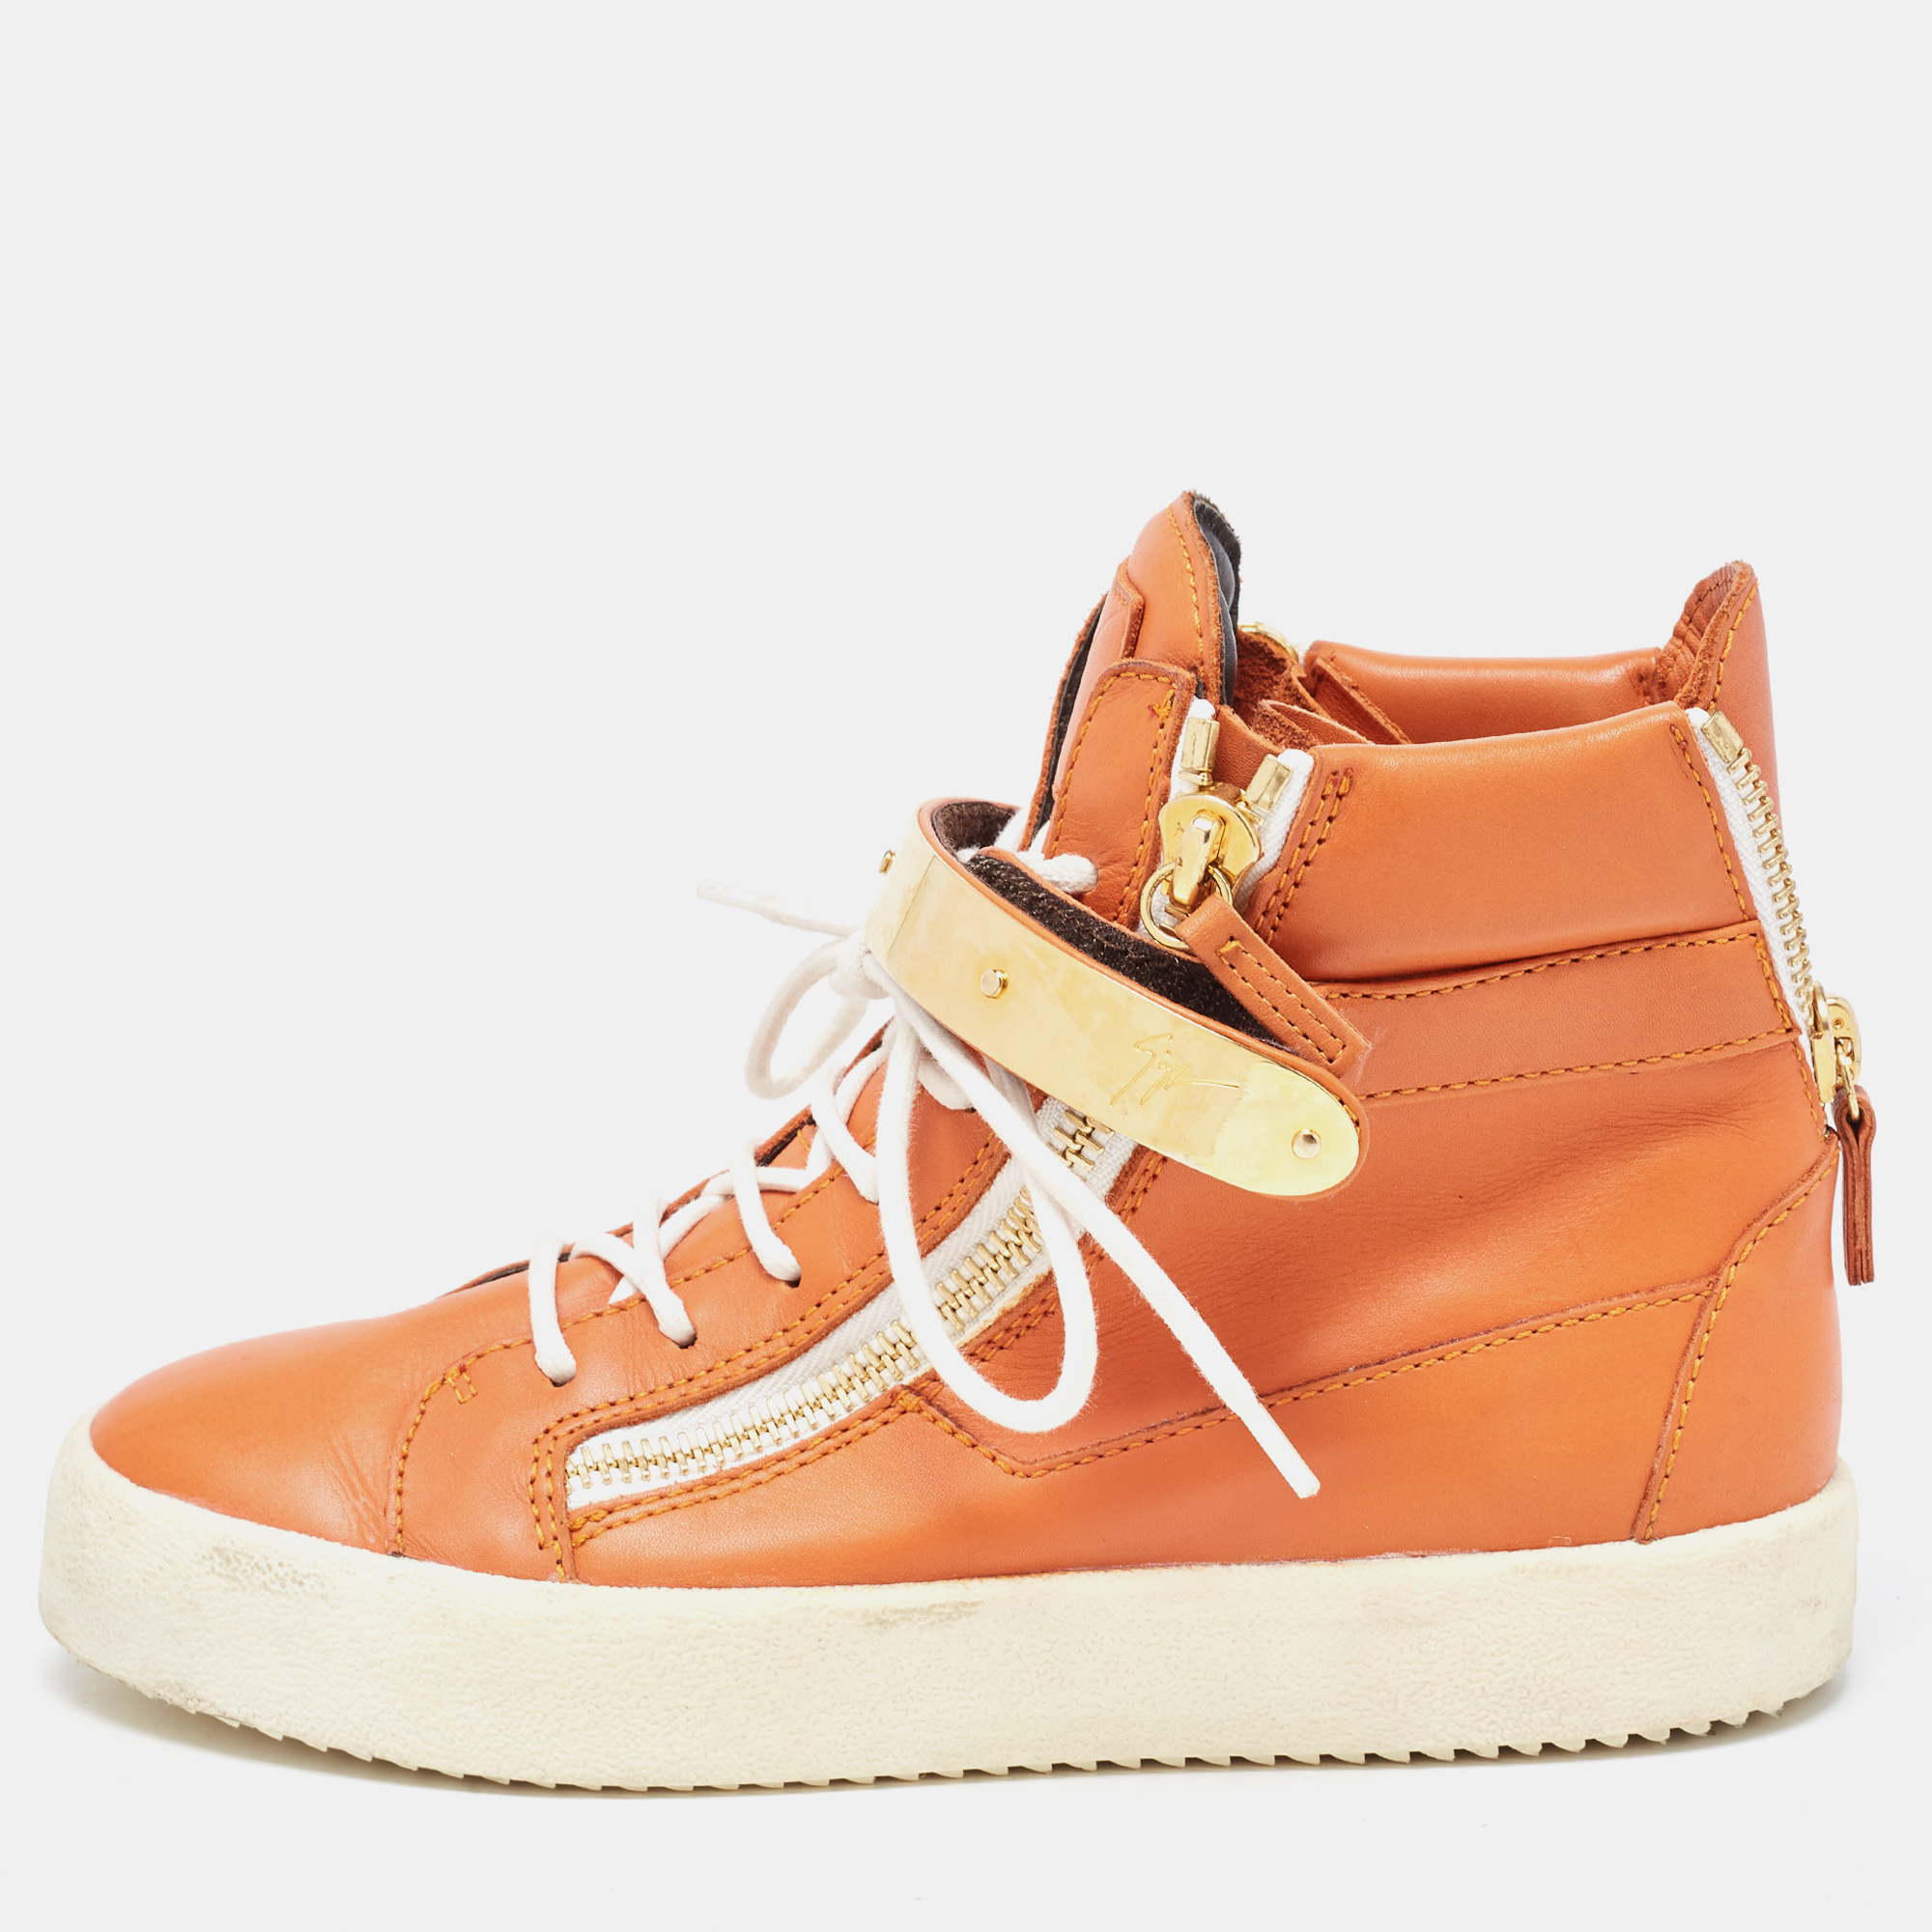 Giuseppe Zanotti Orange Leather Coby High Top Sneakers Size 38